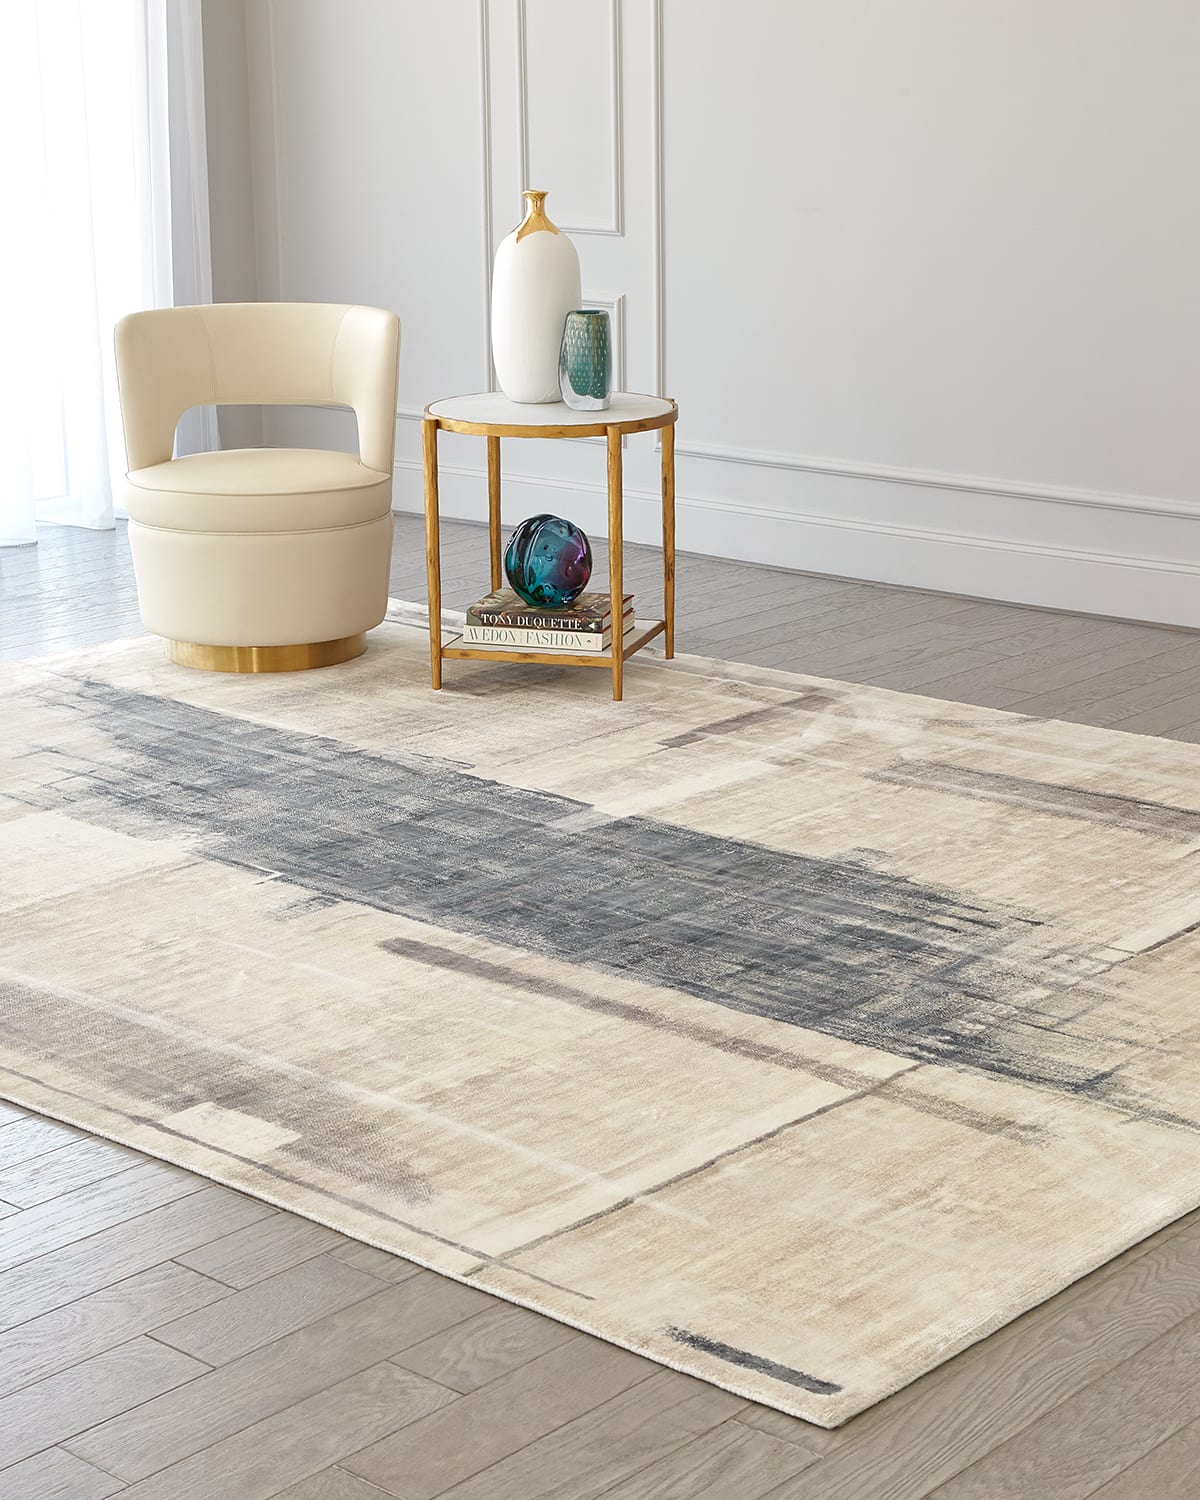 George Sellers For Global Views Art Hand-woven Rug, 5' X 8' In Grey